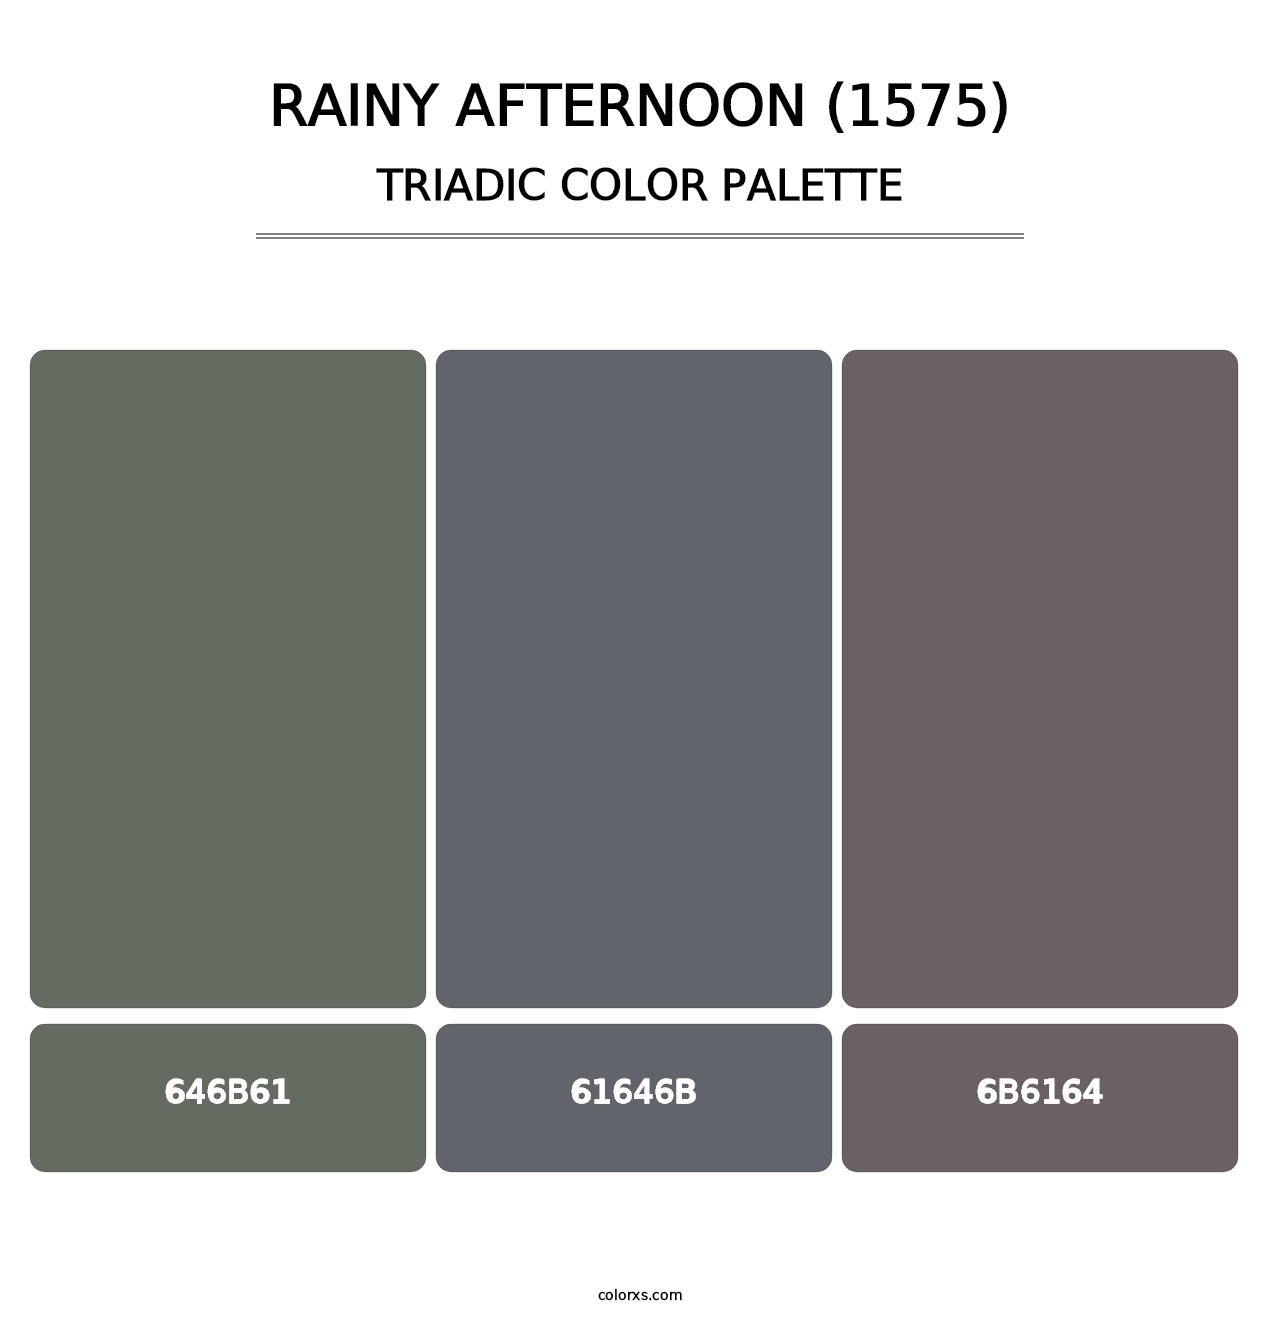 Rainy Afternoon (1575) - Triadic Color Palette